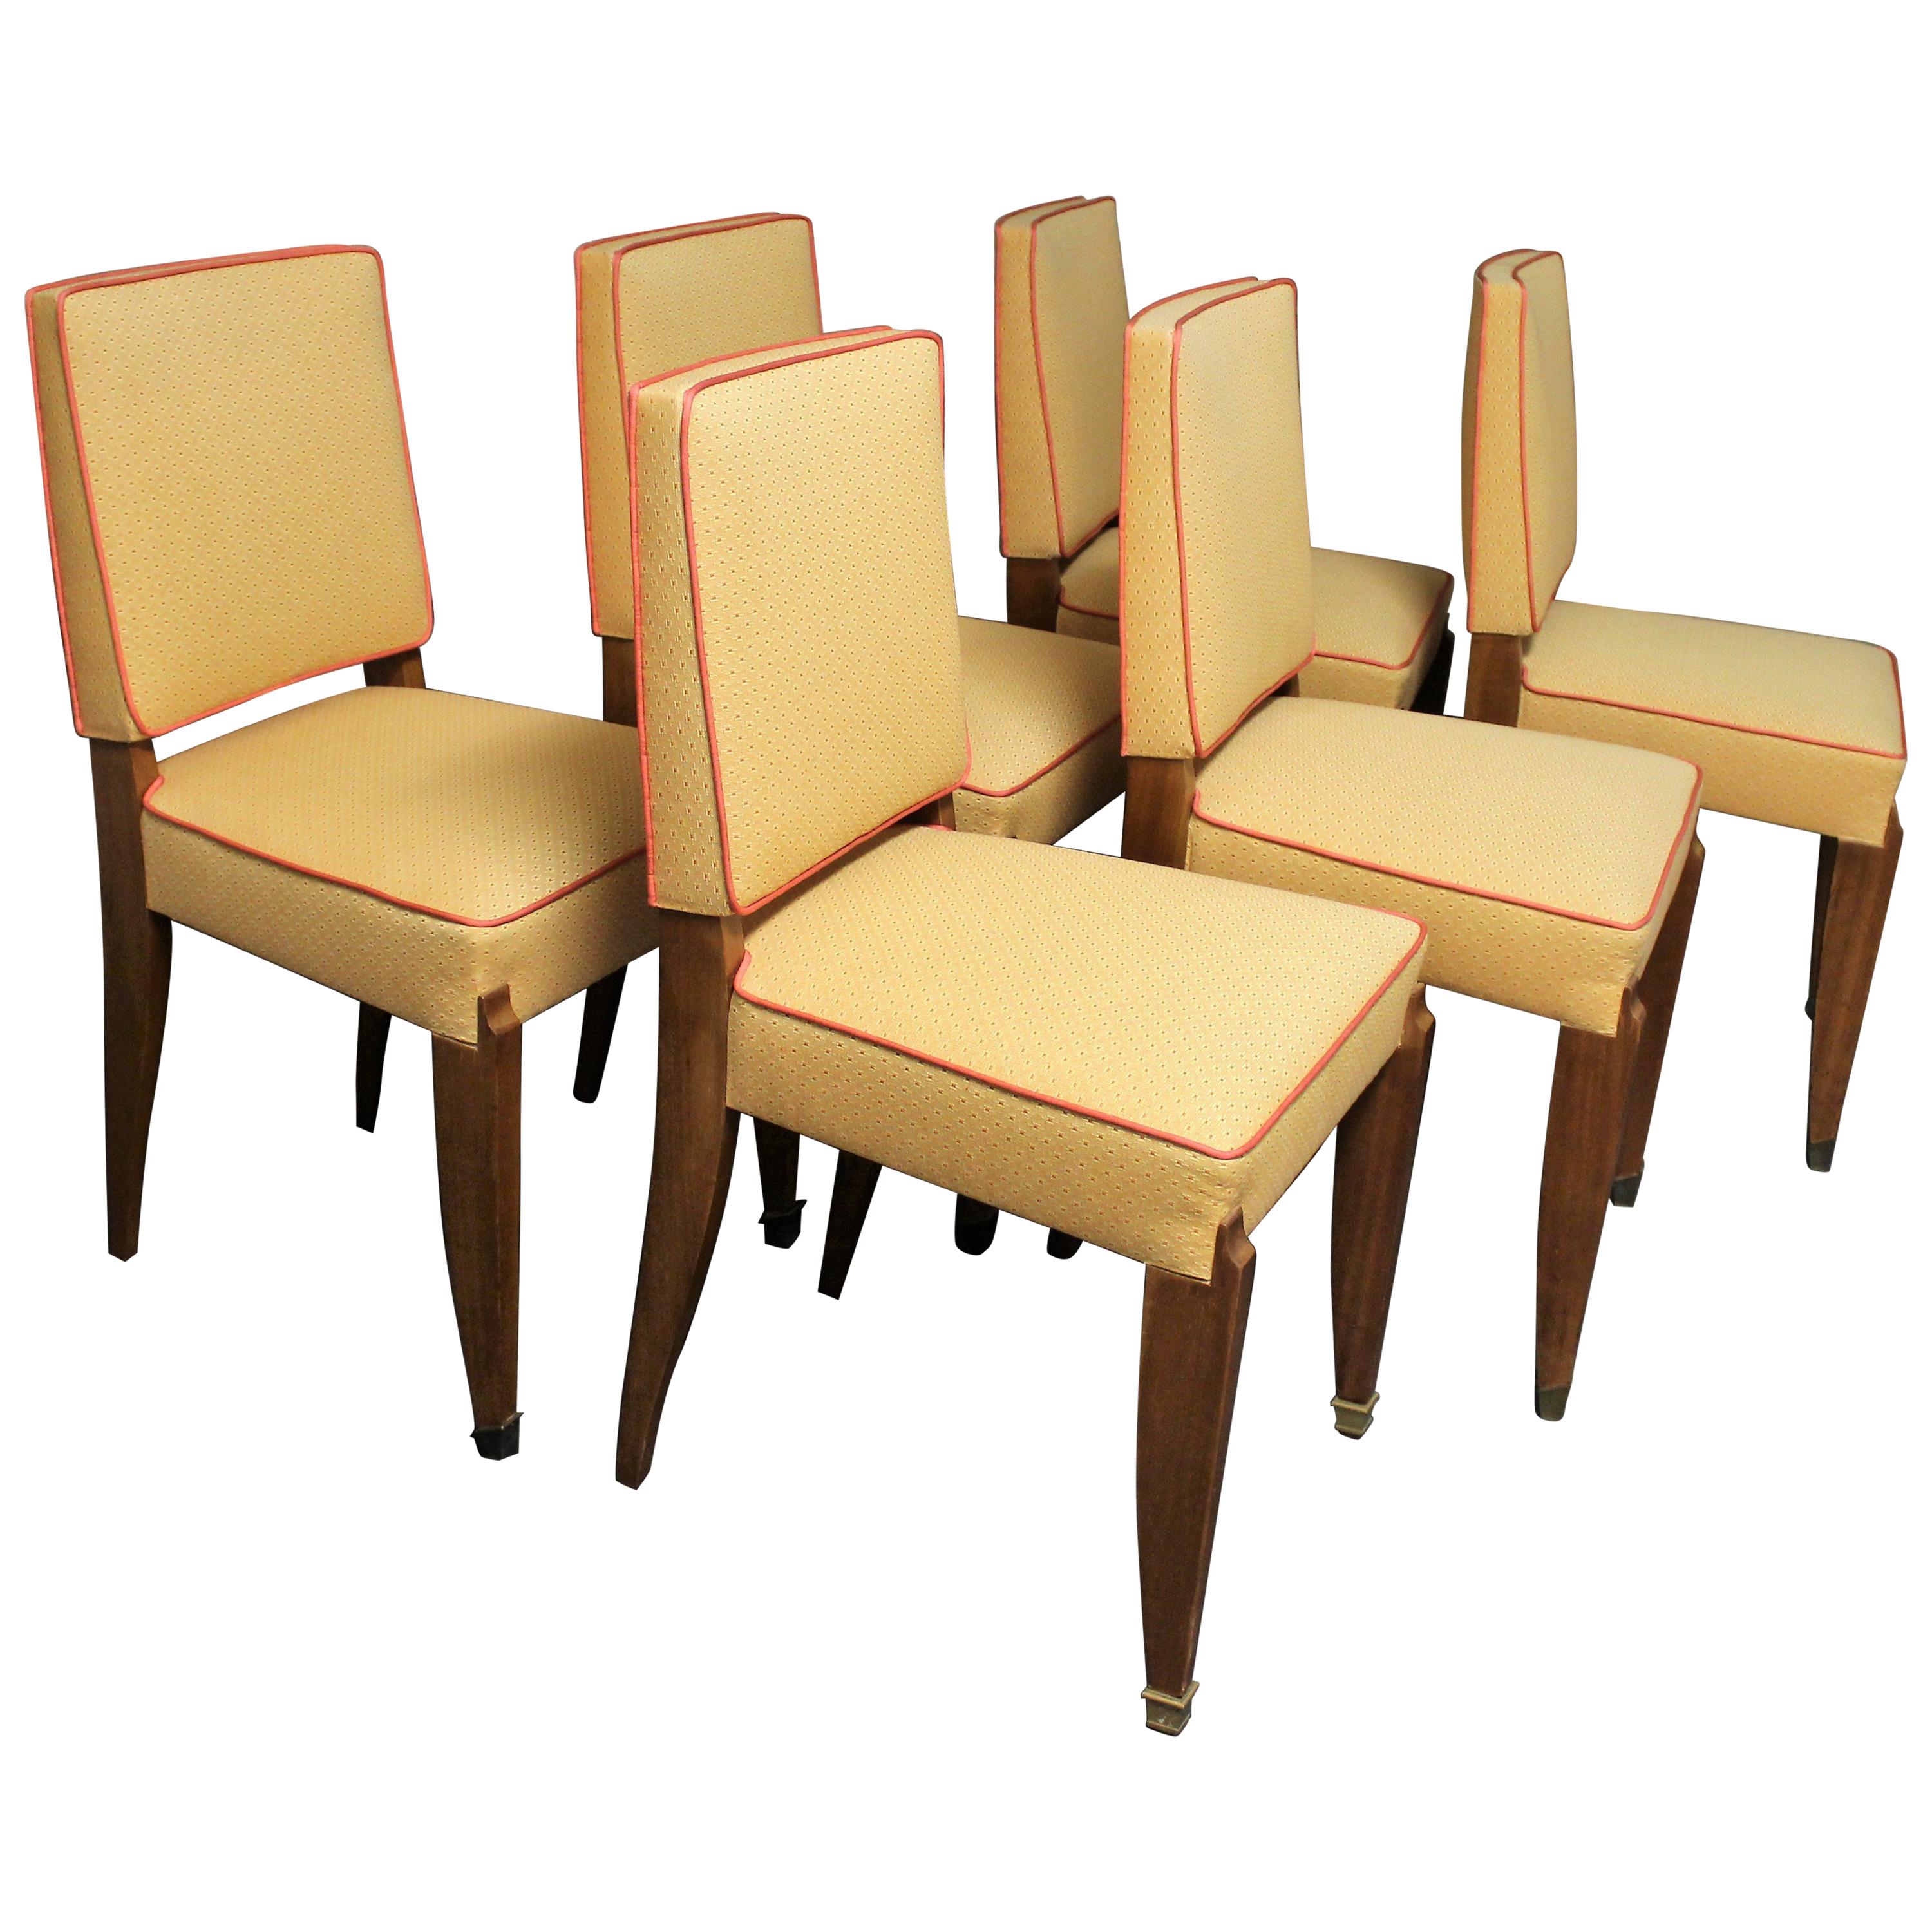 Six French Art Deco Dining Room Chairs